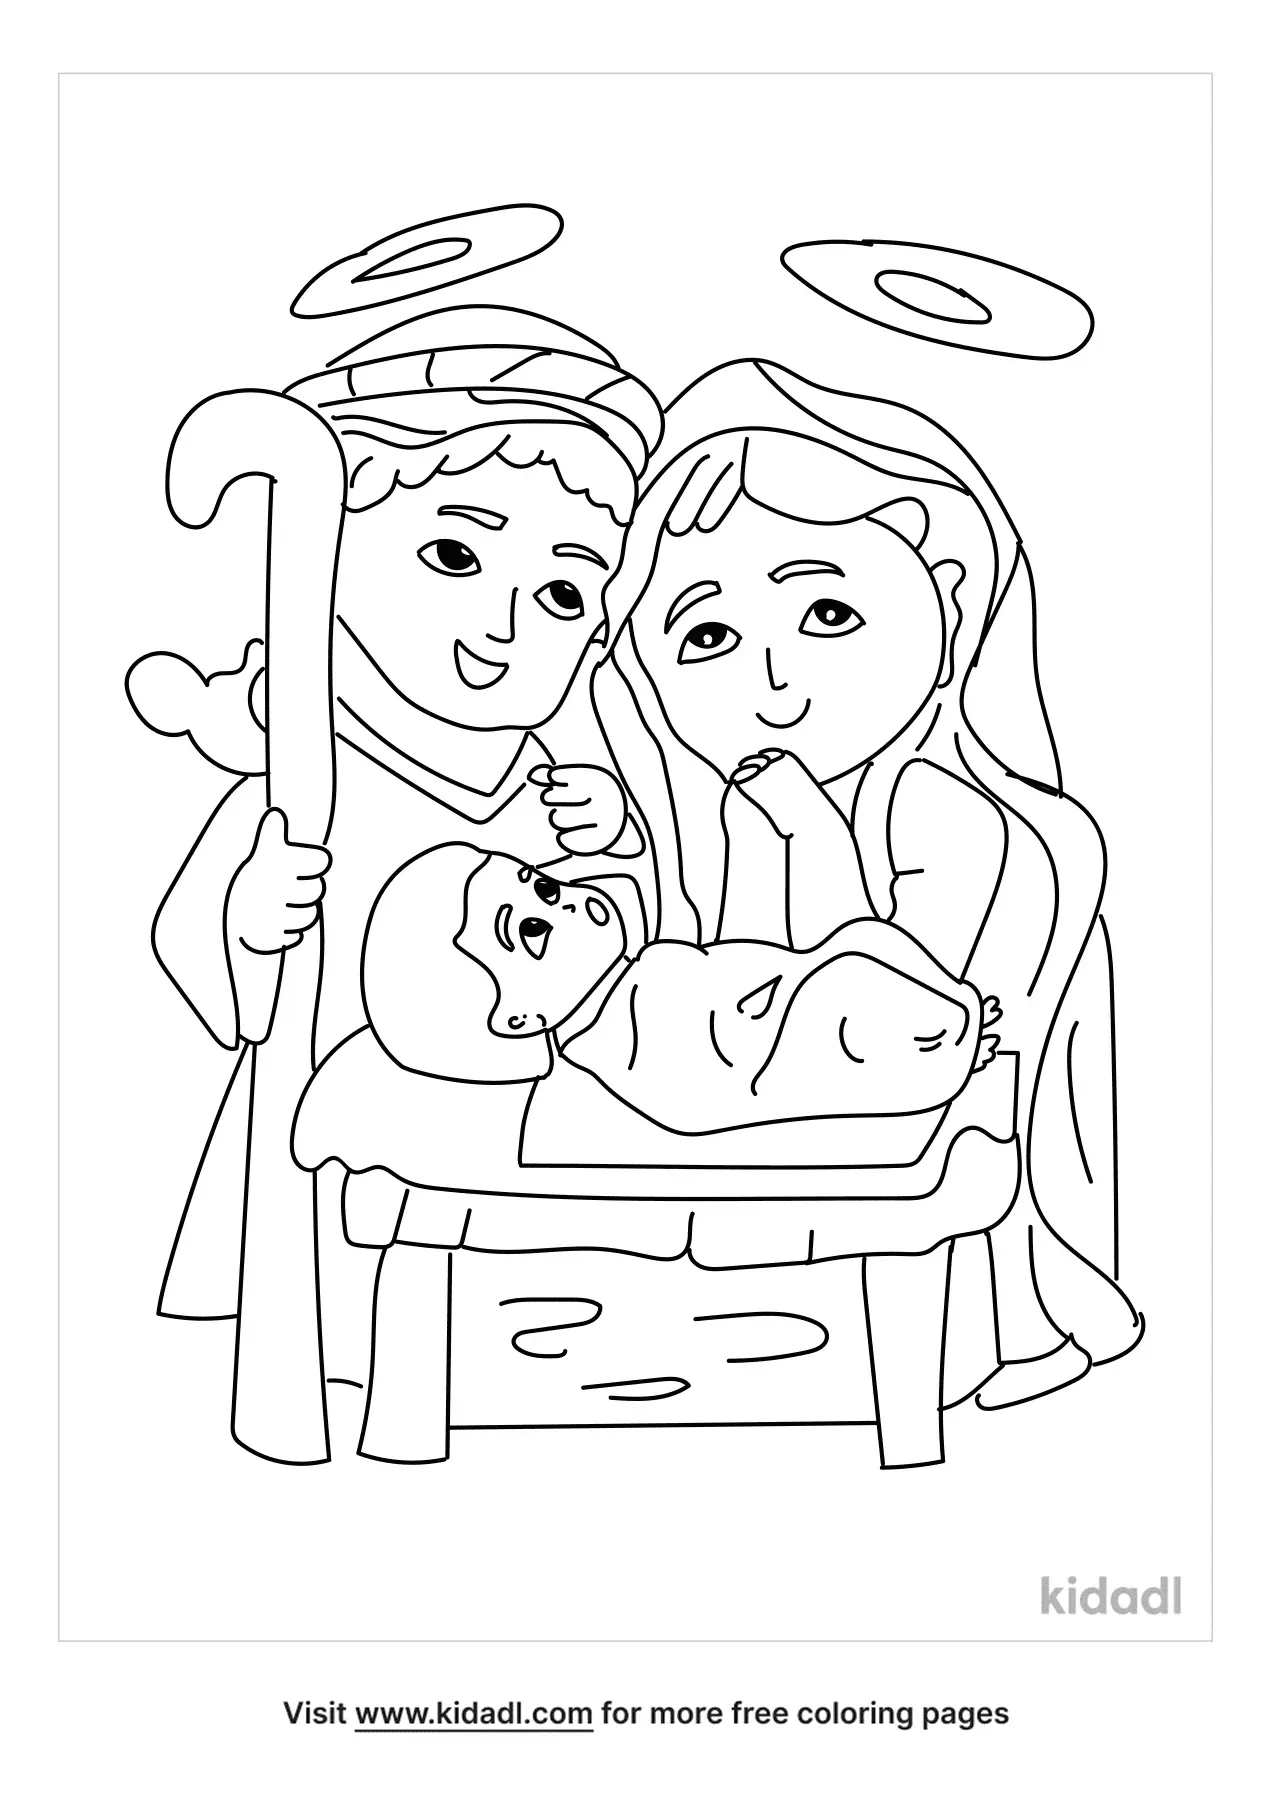 Rachel And Leah Coloring Page | Free Bible Coloring Page | Kidadl